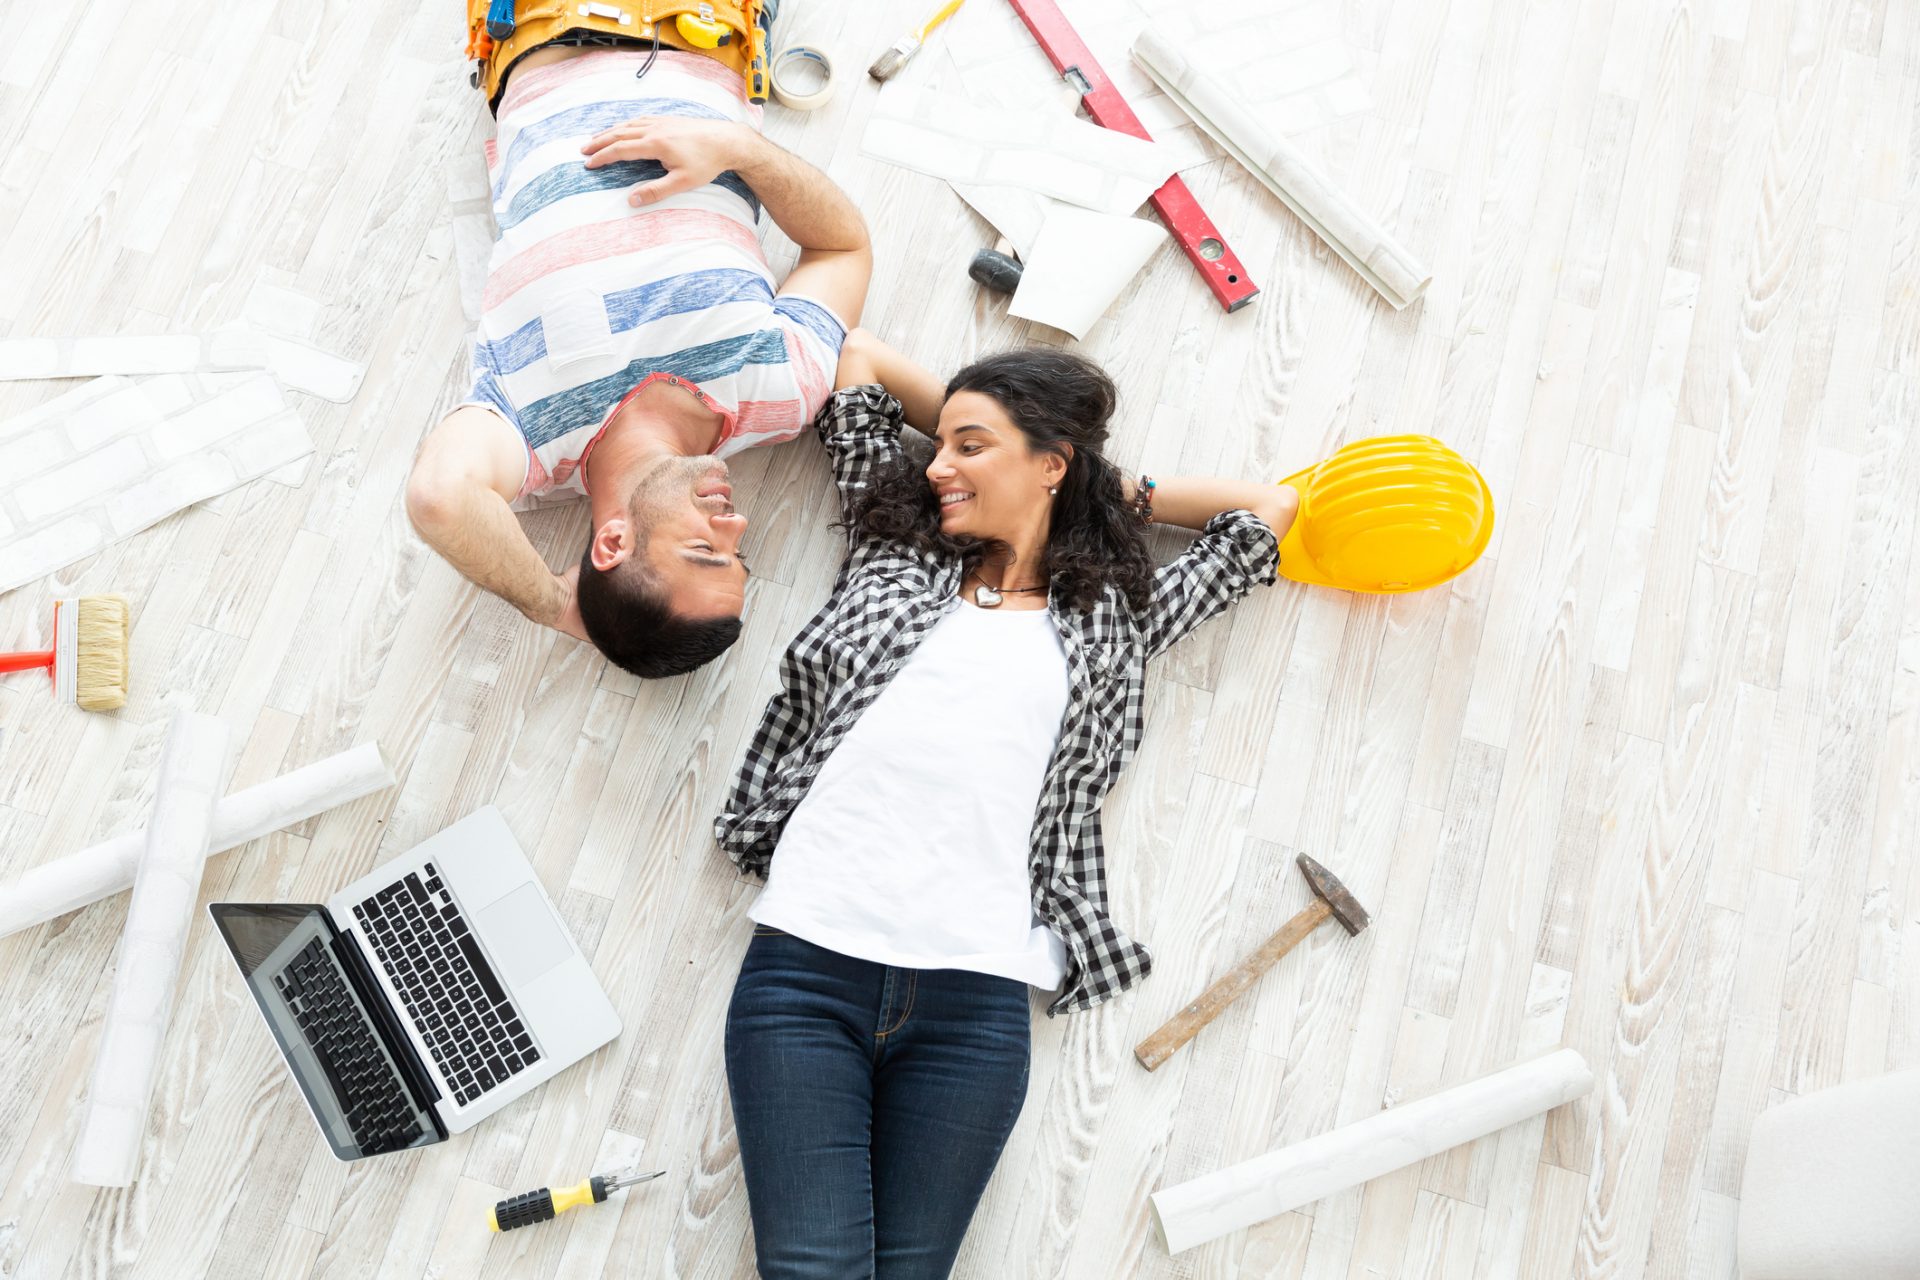 Couple making home improvement, lying down on floor, high angle view.